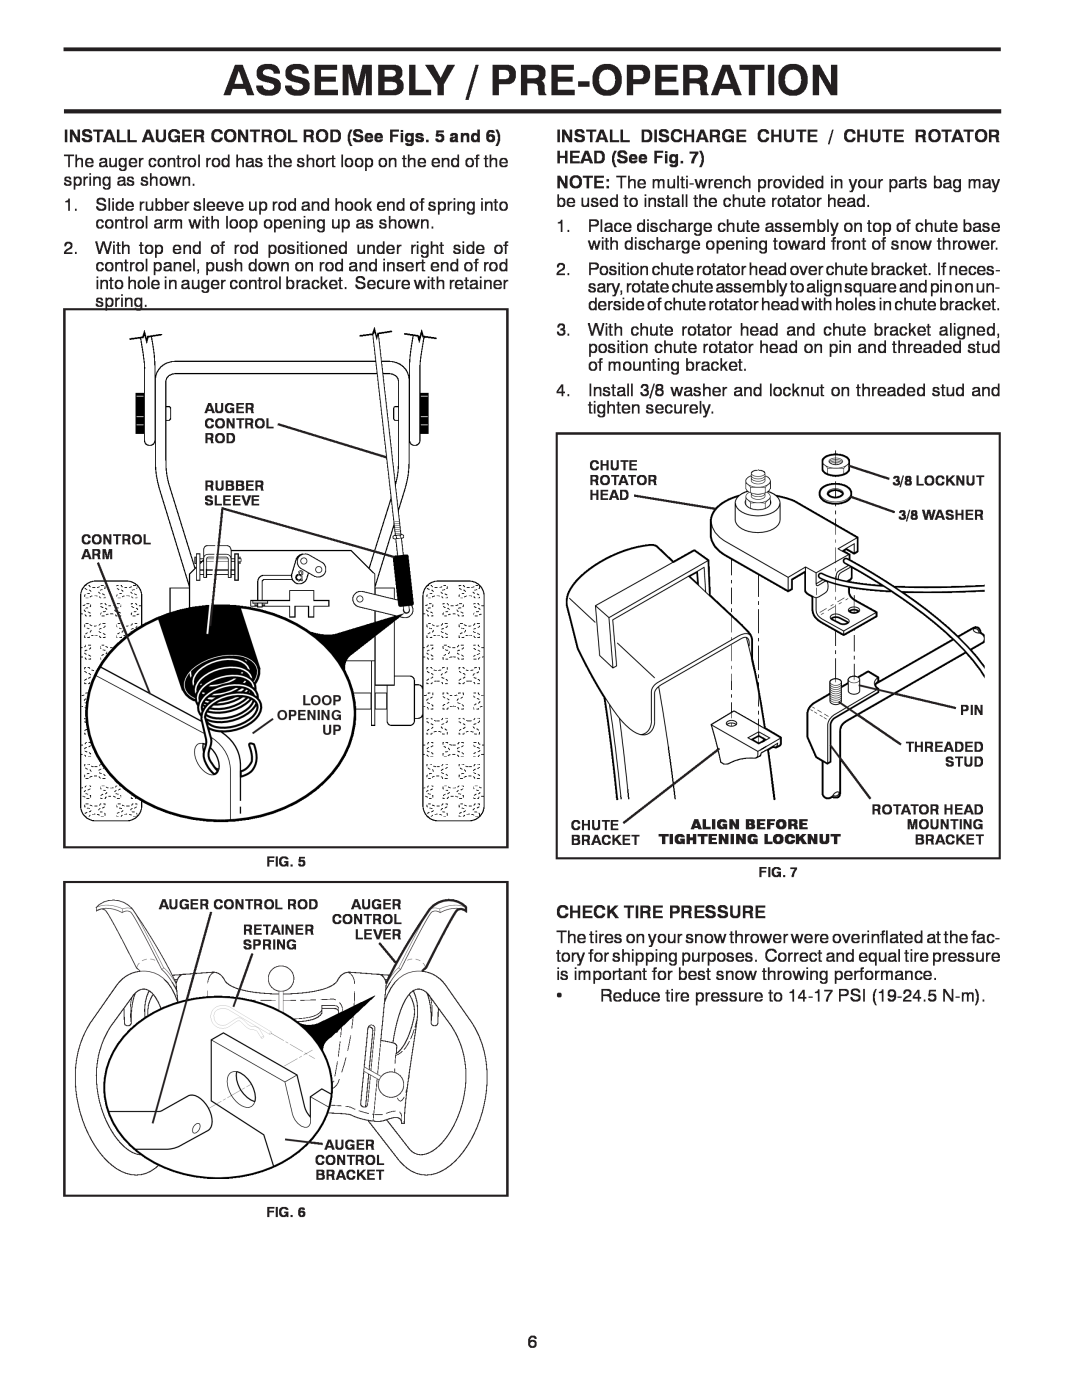 Poulan 421469 owner manual Assembly / Pre-Operation, INSTALL AUGER CONTROL ROD See Figs. 5 and, Check Tire Pressure 